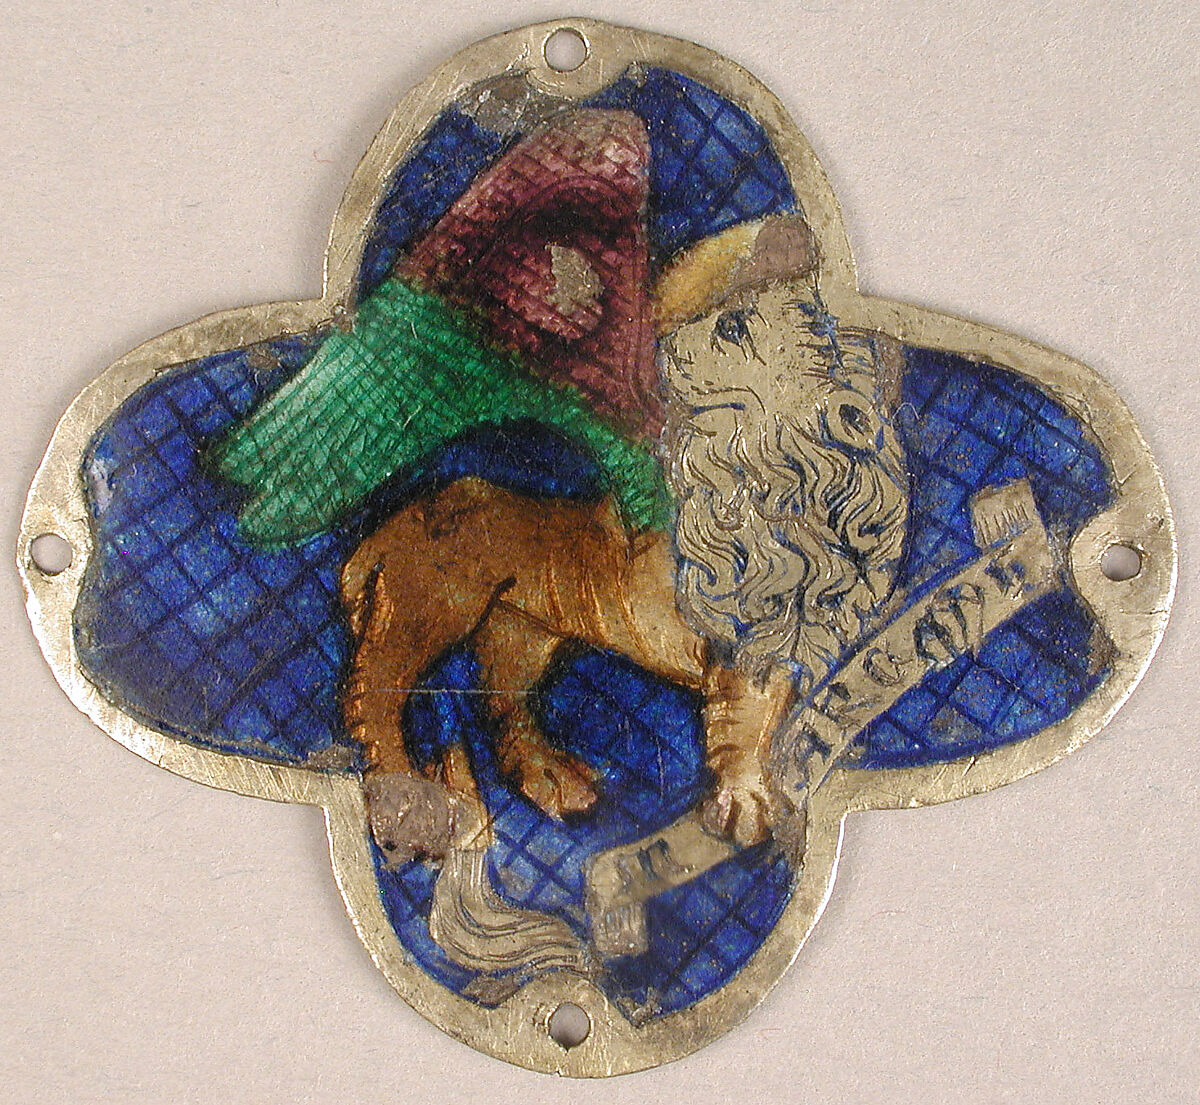 Plaque with the Lion of Saint Mark, Basse taille enamel, silver, Catalan 